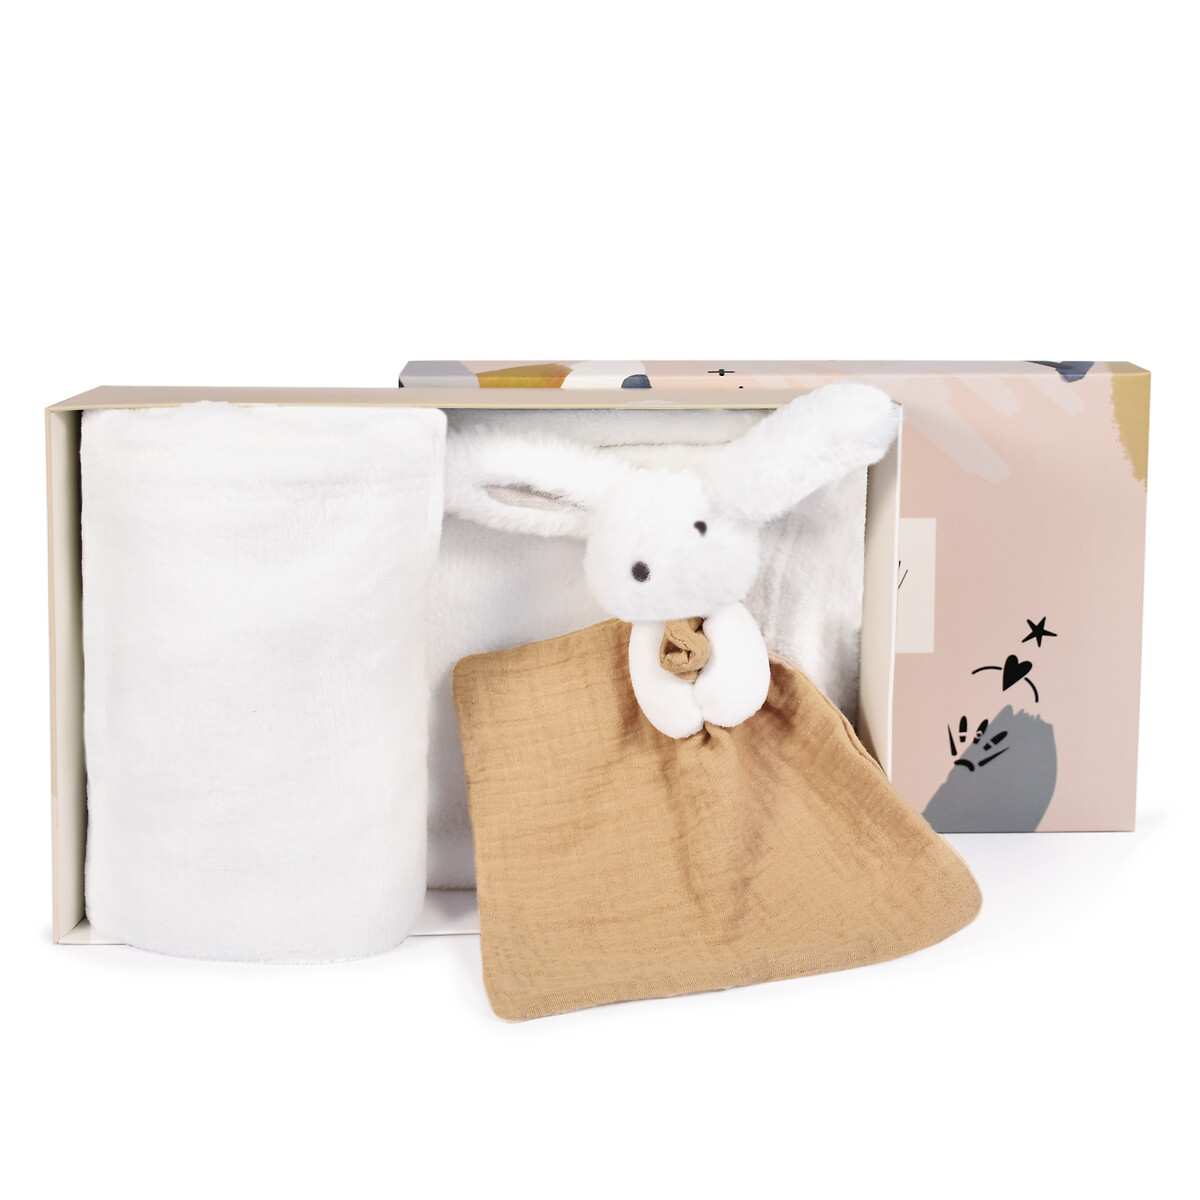 Image of Happy Wild 100 x 70cm Blanket and Soft Toy